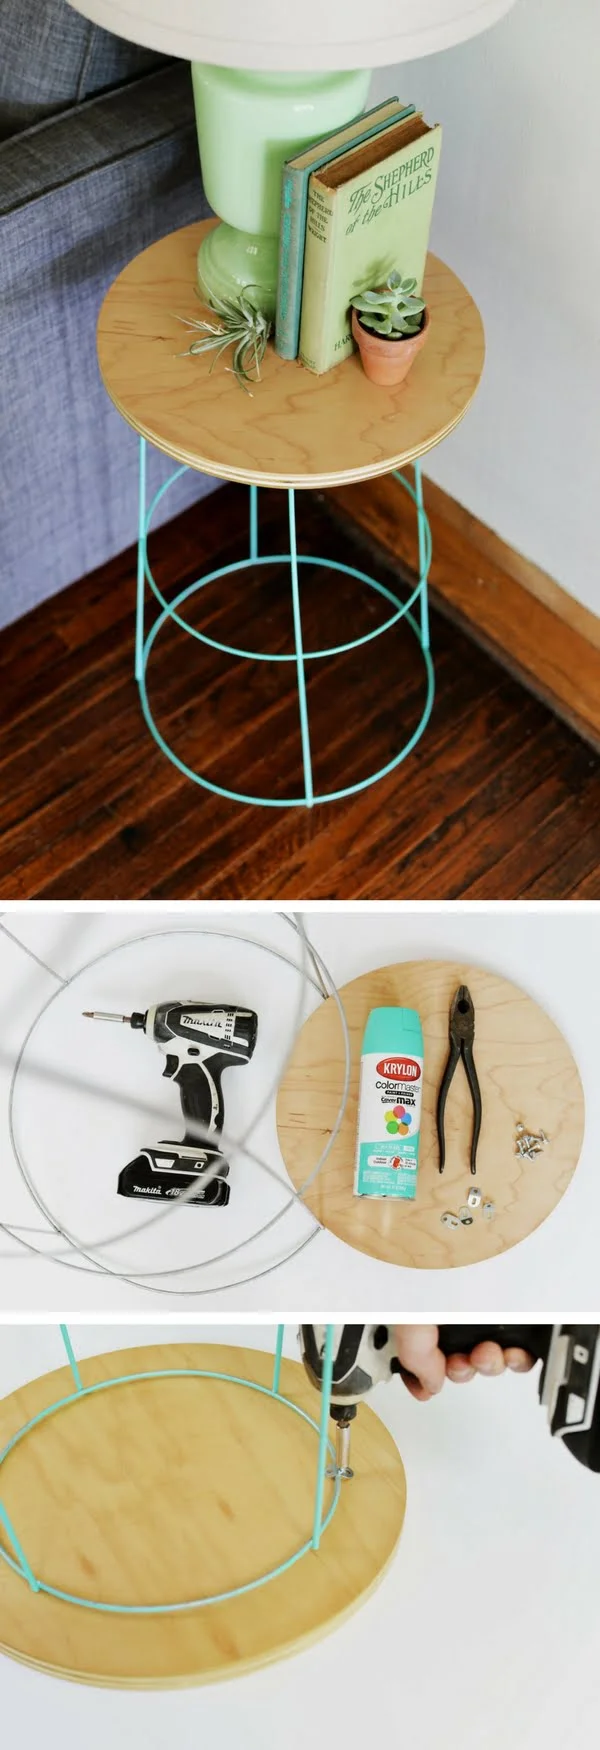 18 Easy DIY Sofa Side Tables You Can Build on a Budget - Check out the tutorial how make a DIY tomato cage sofa side table